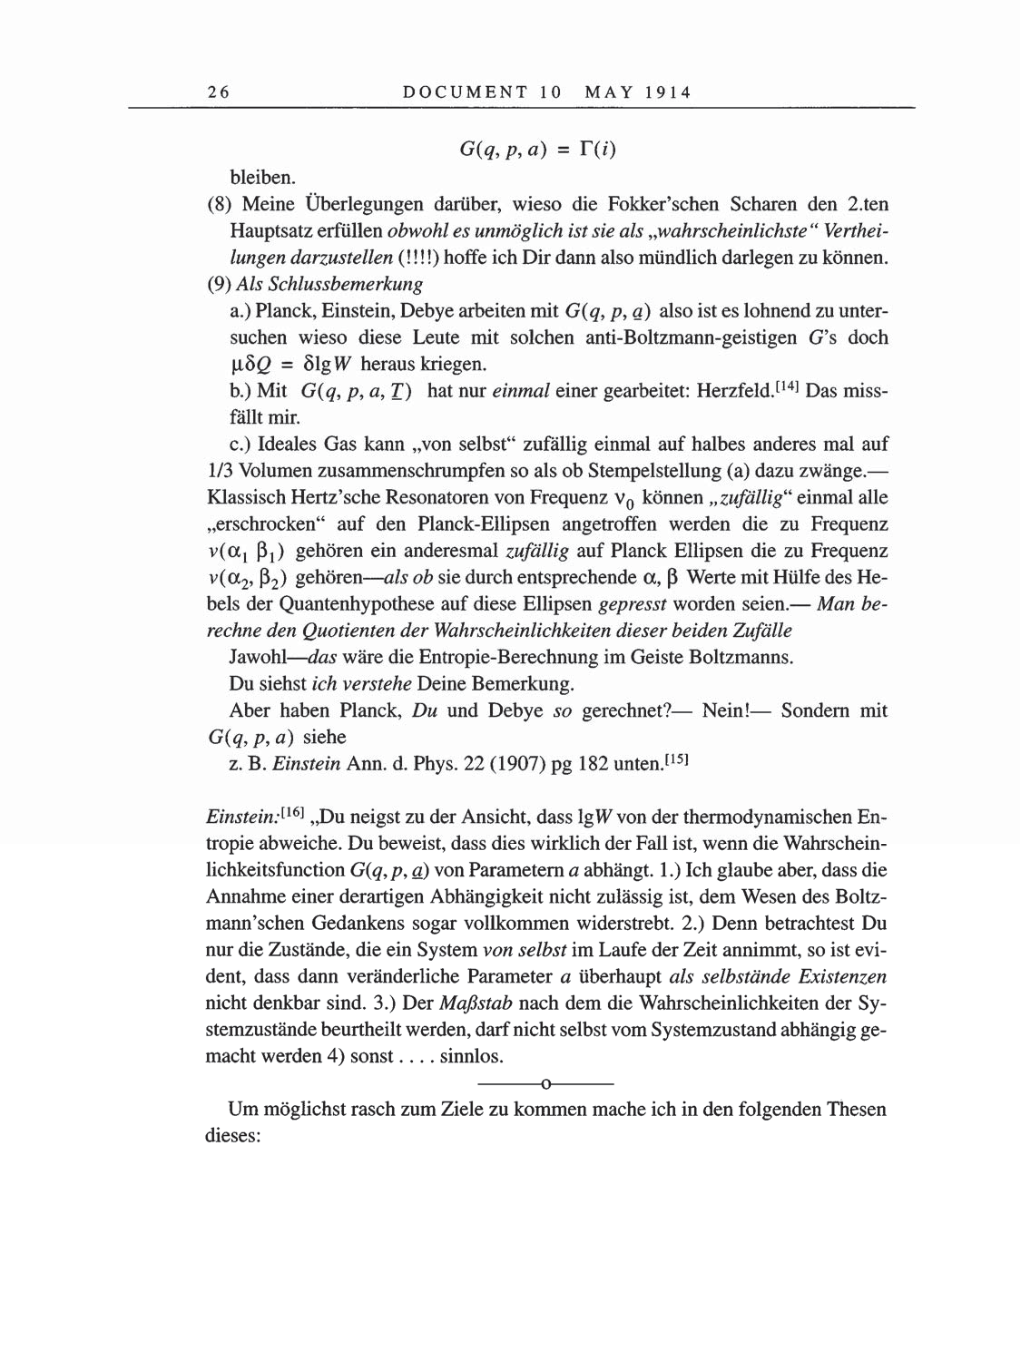 Volume 8, Part A: The Berlin Years: Correspondence 1914-1917 page 26